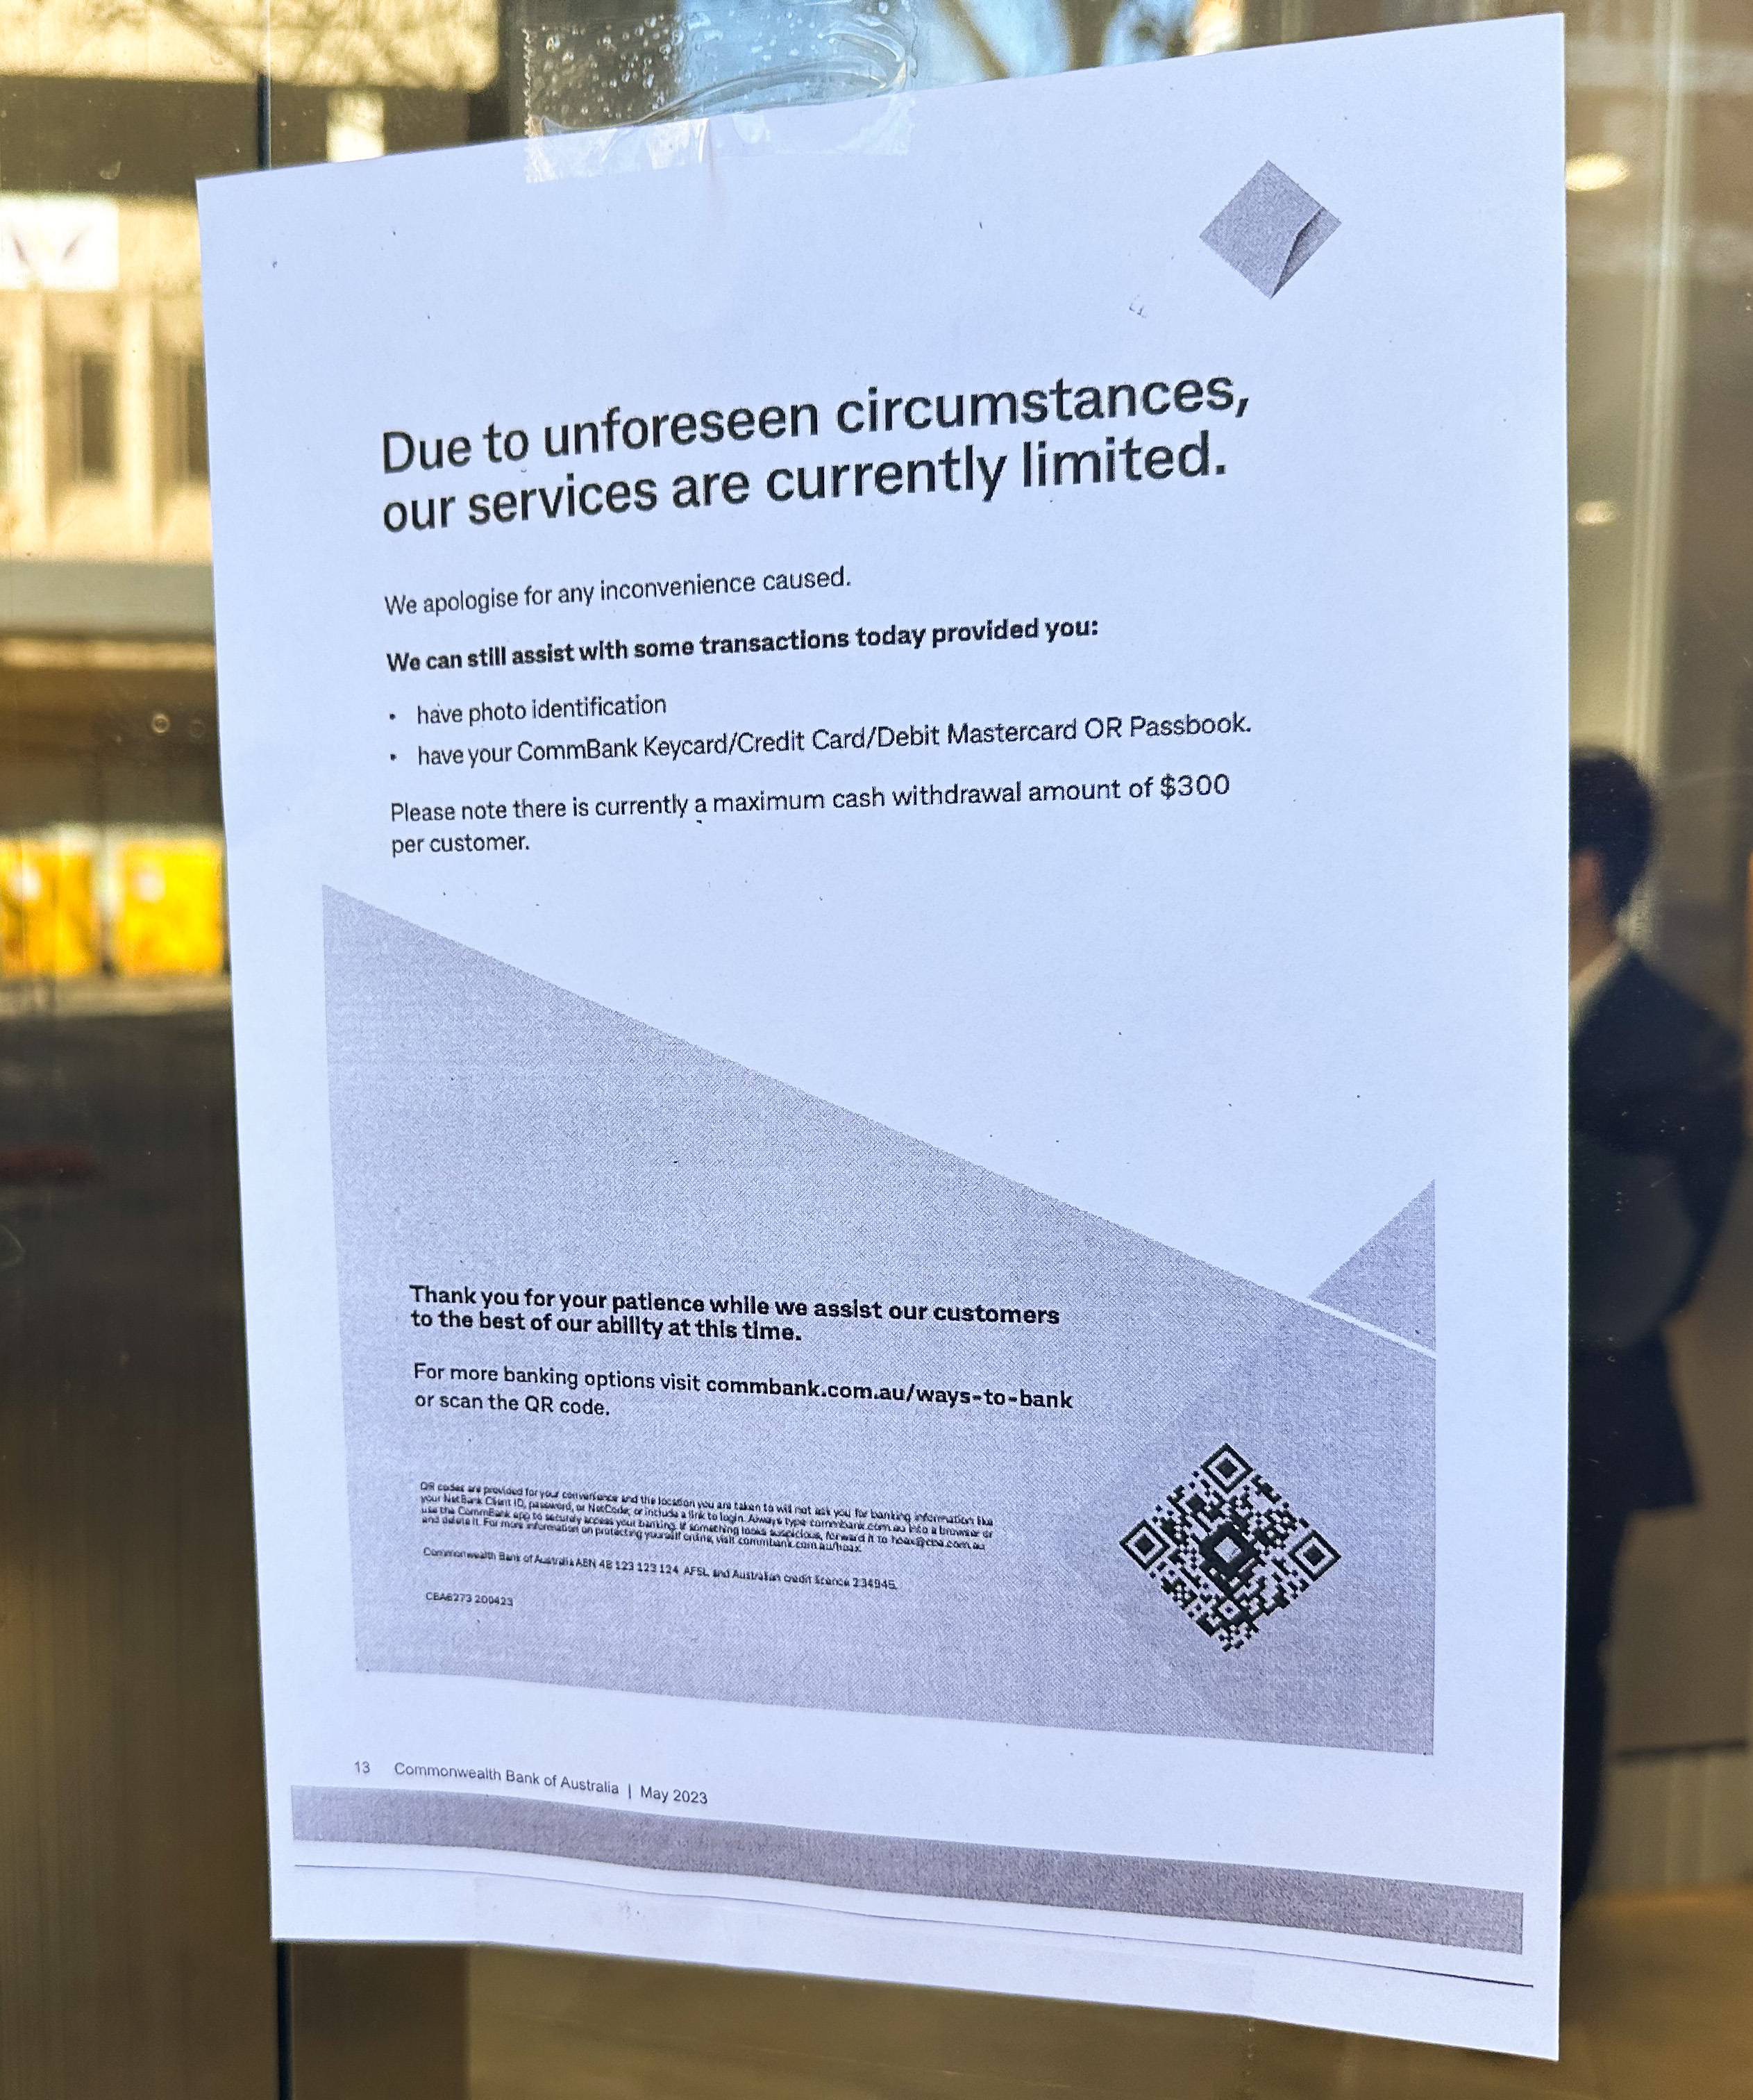 A sign on an A4 piece of paper which says "due to unforeseen circumstances, our services are currently limited".